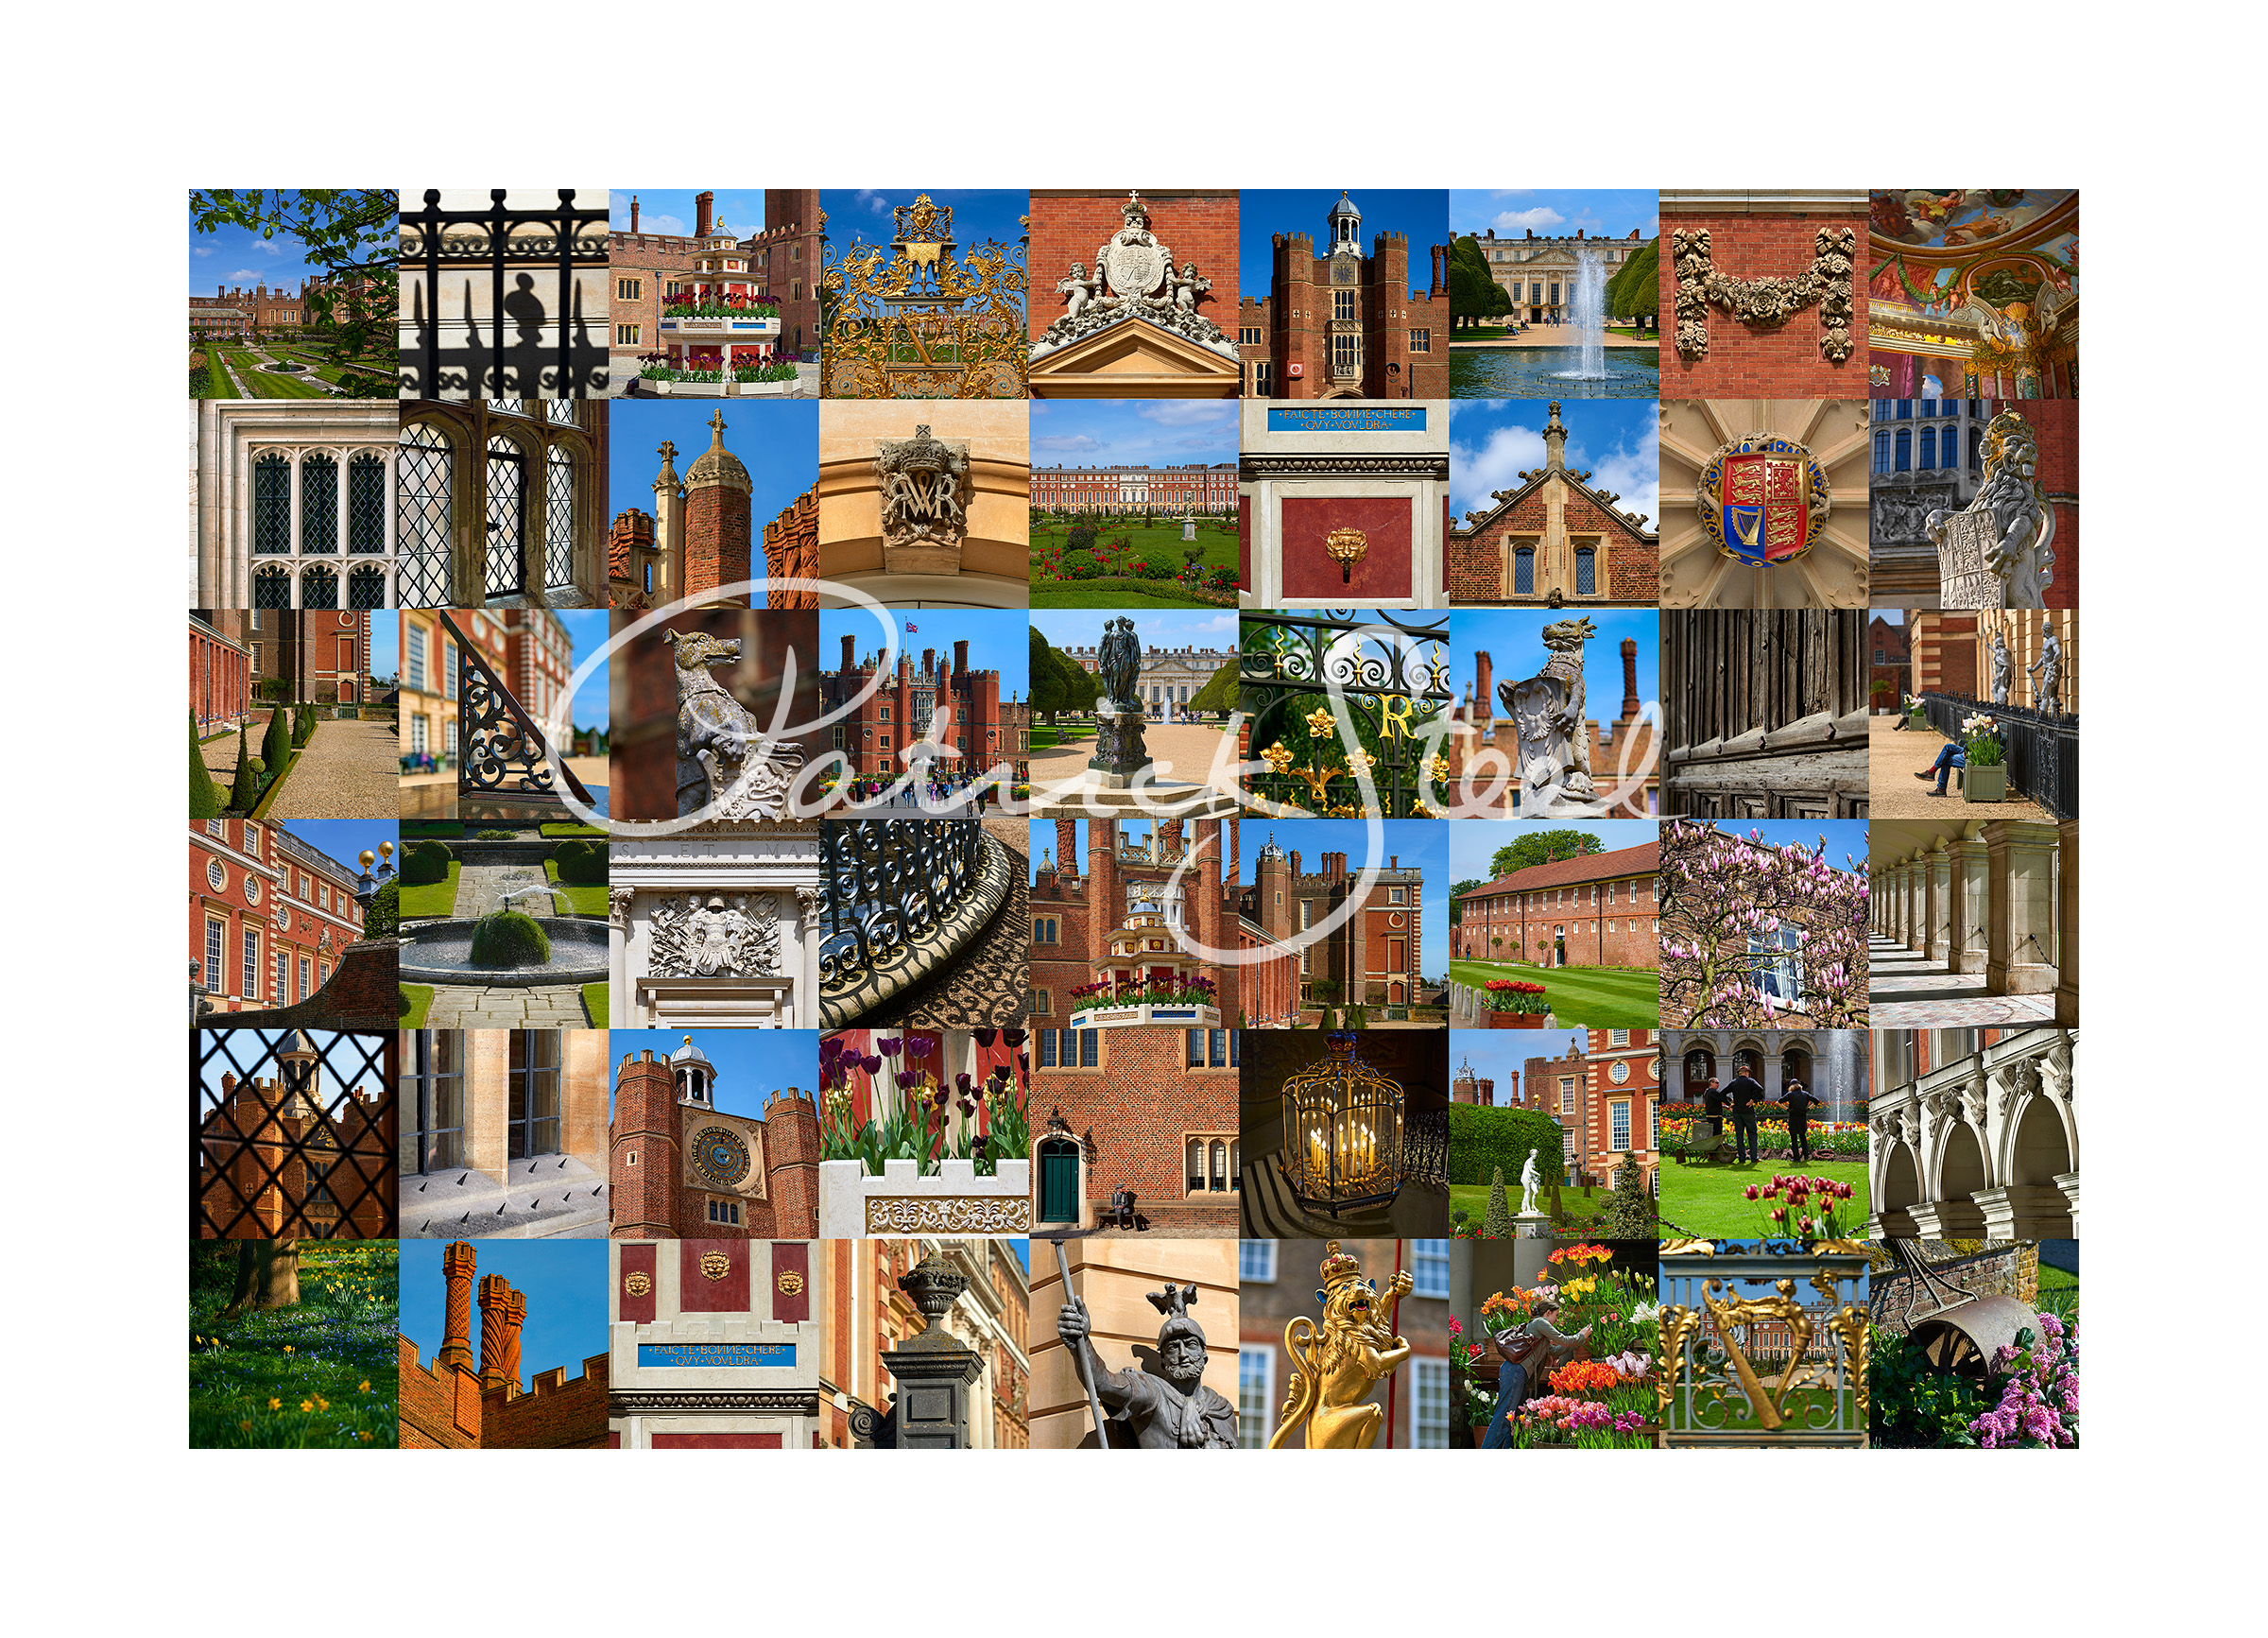 a rectangular format photographic montage of hampton court palace by british photographer patrick steel